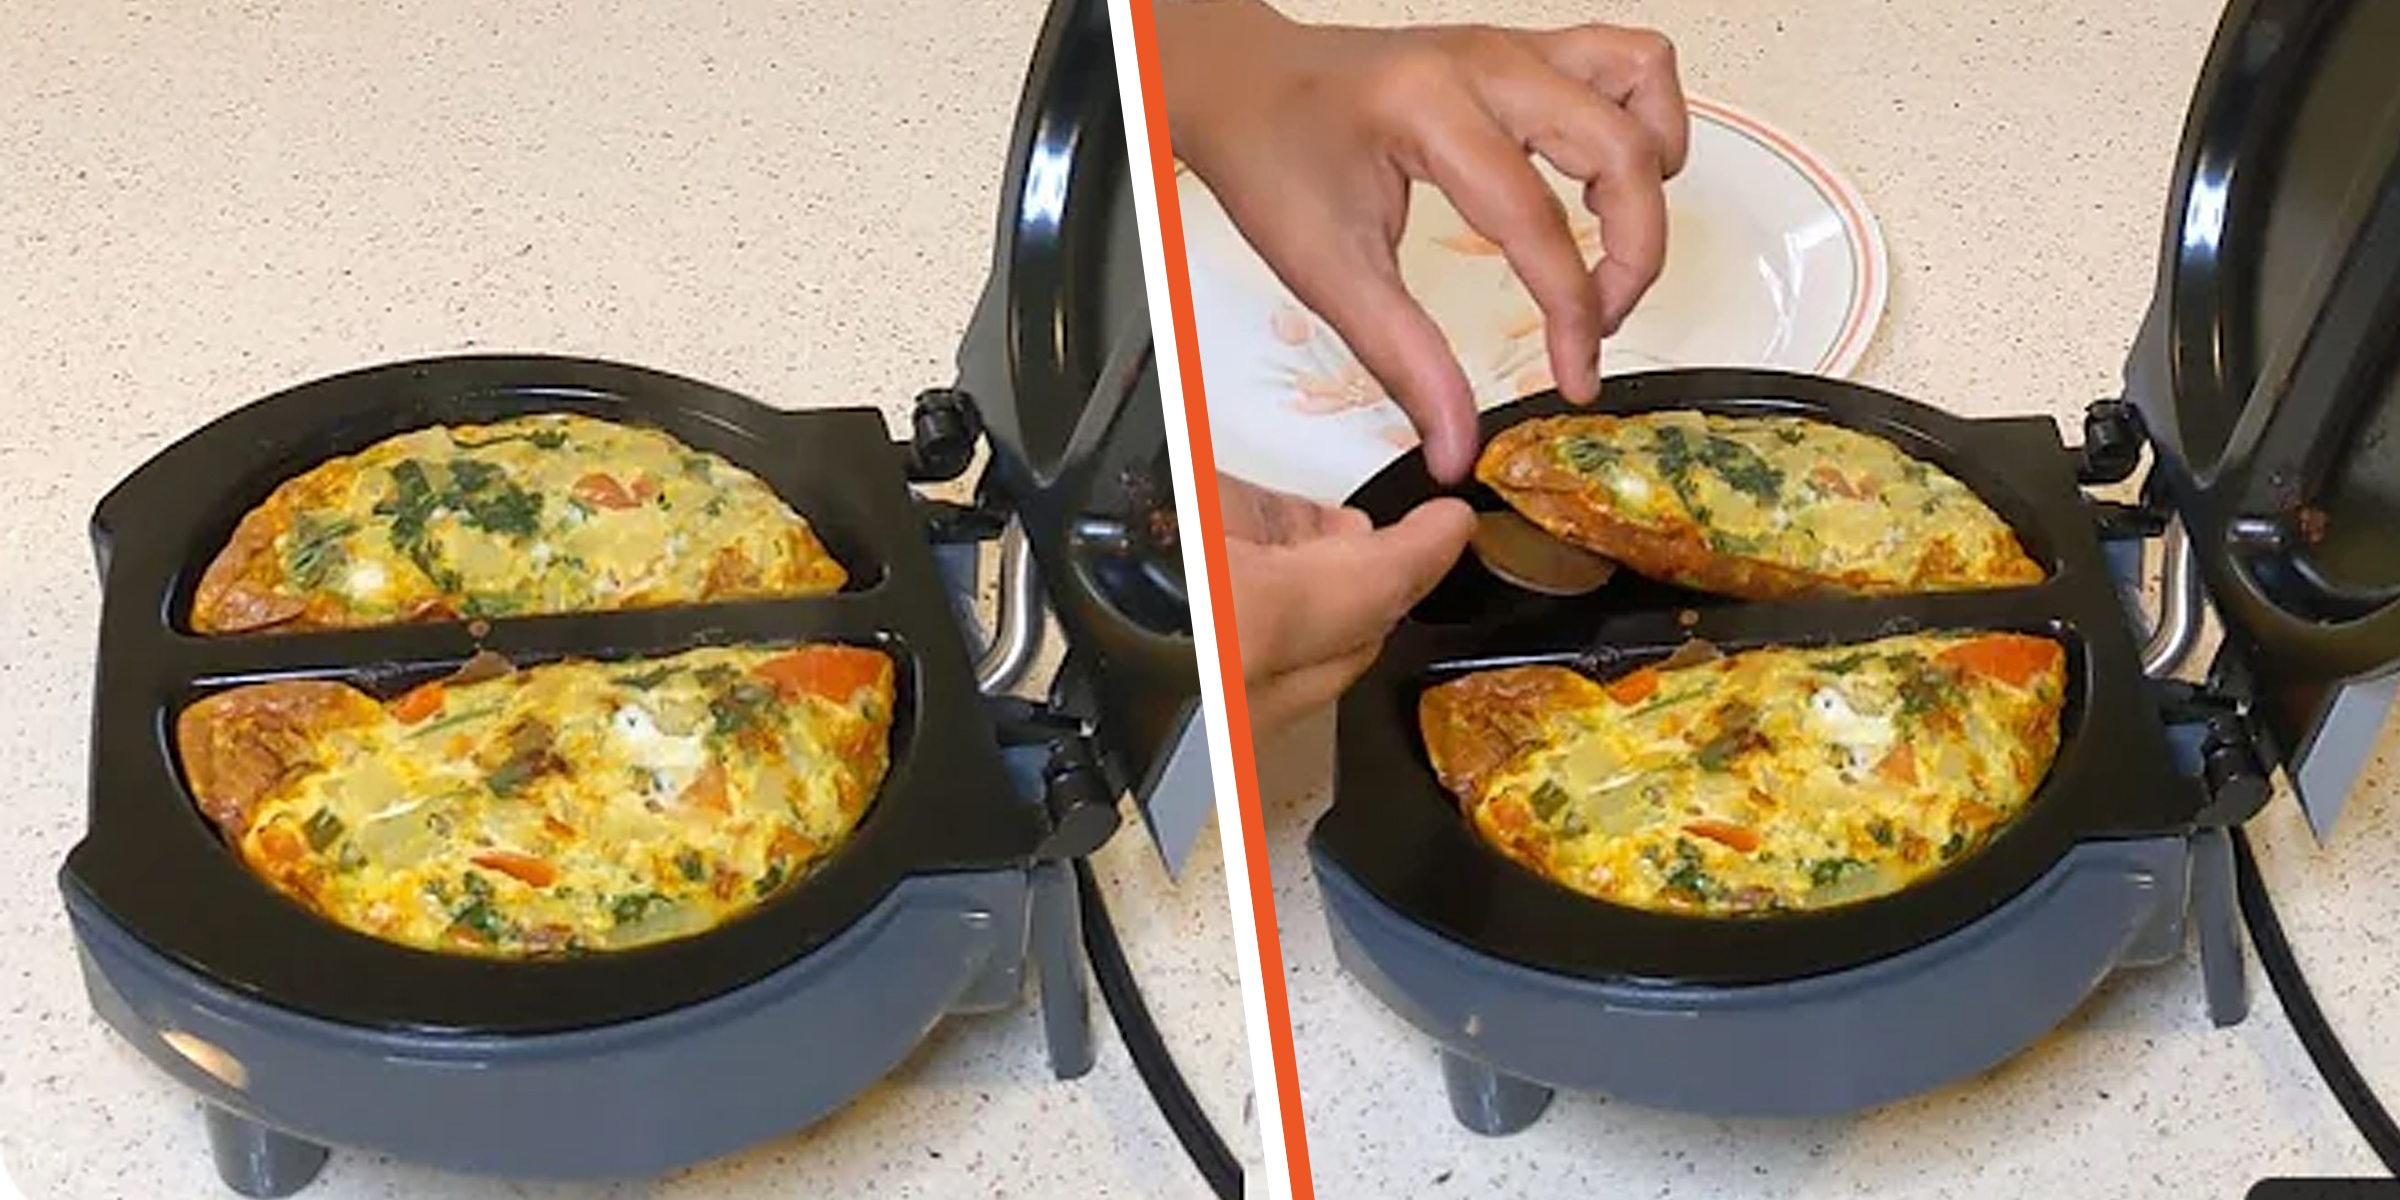 A person cooking using a GT Xpress | Source: YouTube/@mitooscorner